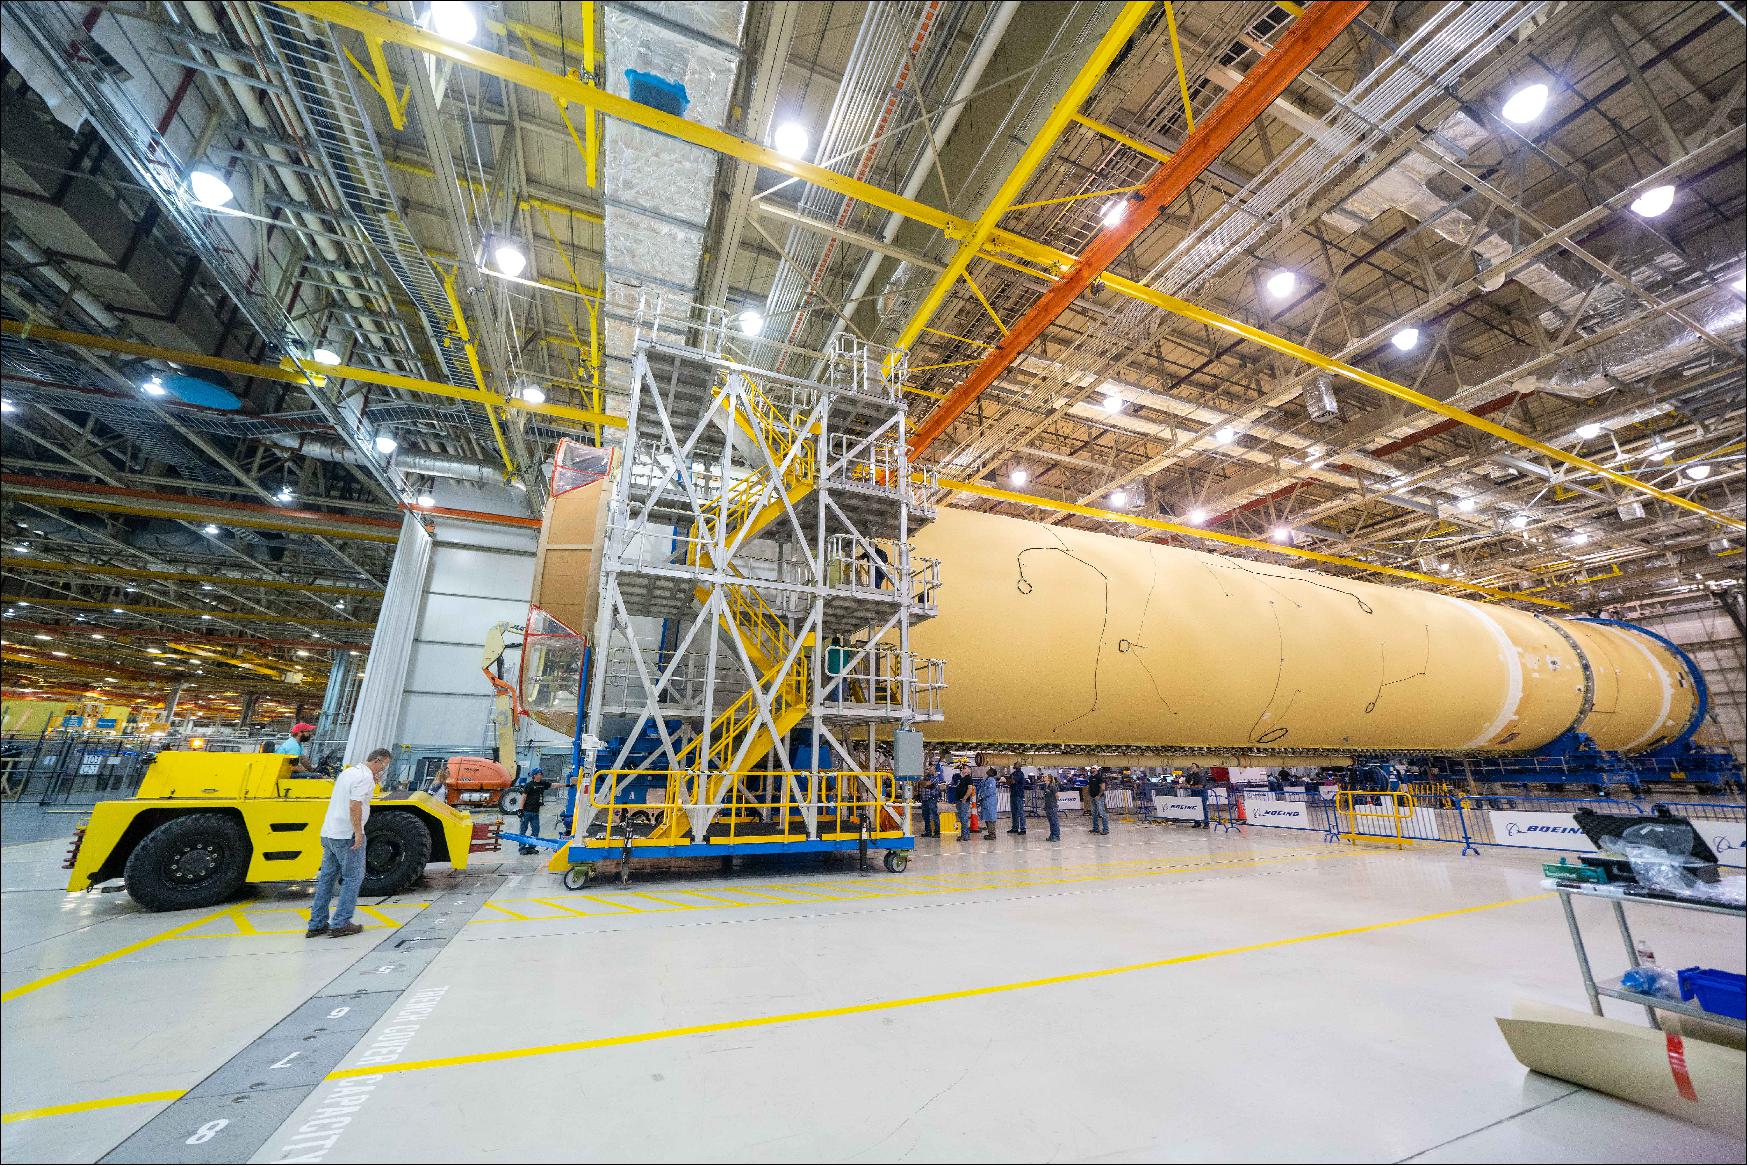 Figure 29: NASA finished assembling the main structural components for the Space Launch System (SLS) rocket core stage on Sept. 19. Engineers at NASA’s Michoud Assembly Facility in New Orleans fully integrated the last piece of the 212-foot-tall (64.6 m) core stage by adding the engine section to the rest of the previously assembled structure. Boeing technicians bolted the engine section to the stage’s liquid hydrogen propellant tank. The engine section is located at the bottom of the 212-foot-tall core stage and is one of the most complicated pieces of hardware for the SLS rocket. It is the attachment point for the four RS-25 rockets and the two solid rocket boosters that produce a combined 8.8 millions pounds of thrust (35585 kNewton) to send Artemis I to space. In addition, the engine section includes vital systems for mounting, controlling and delivering fuel from the stage’s two liquid propellant tanks to the rocket’s engines. This fall, NASA will work with core stage lead contractor, Boeing, and the RS-25 engine lead contractor, Aerojet Rocketdyne, to attach the four RS-25 engines and connect them to the main propulsion systems inside the engine section (image credit: NASA, Steven Seipel)